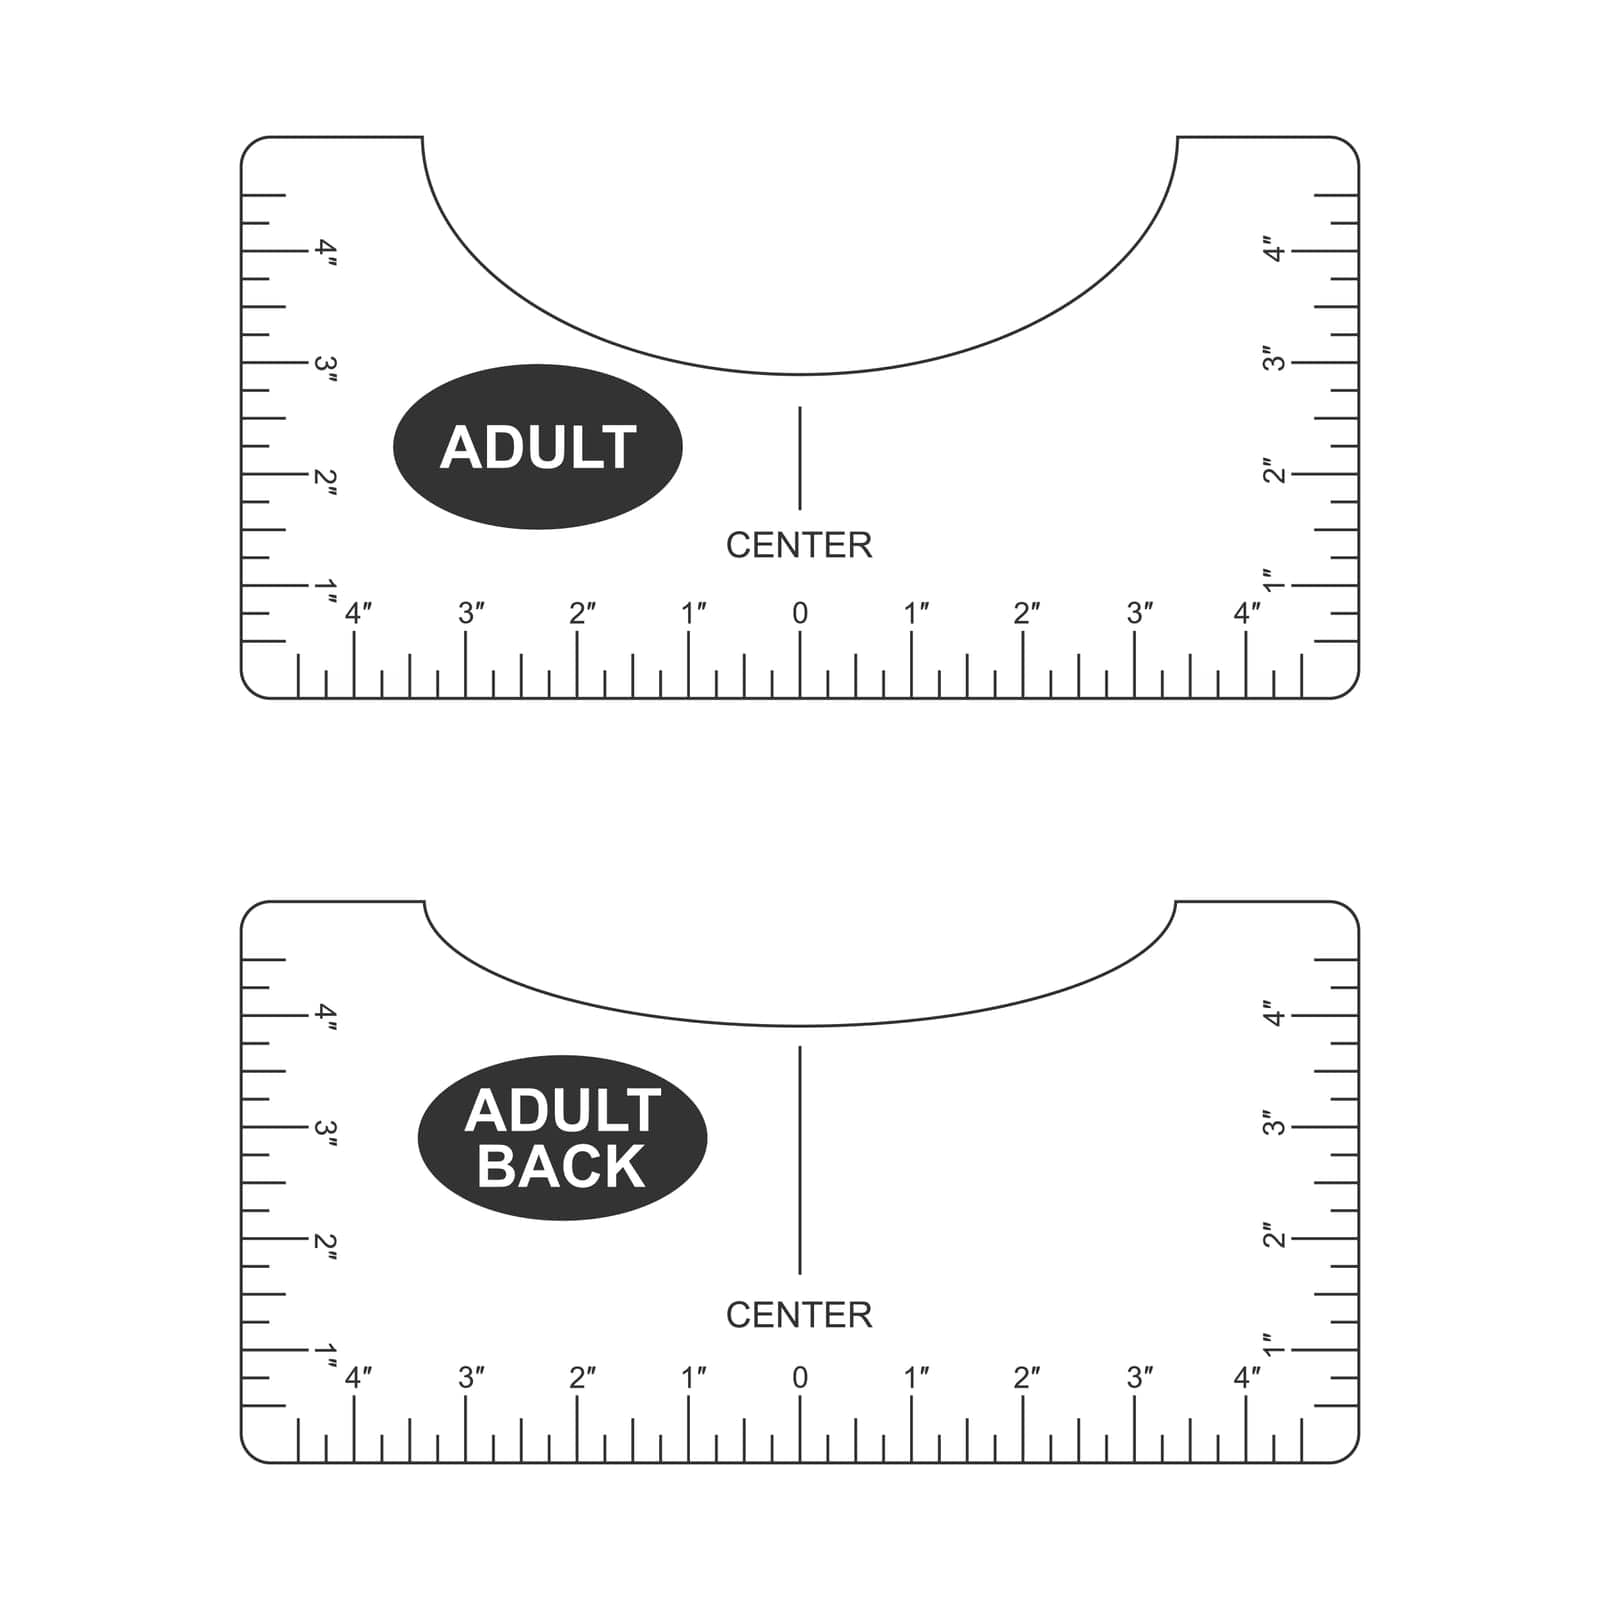 T shirt alignment guide. Adult front and back size templates. Rulers for centering clothing design. Sewing measurement tool with markup and numbers for print or laser cut. Inches calibration